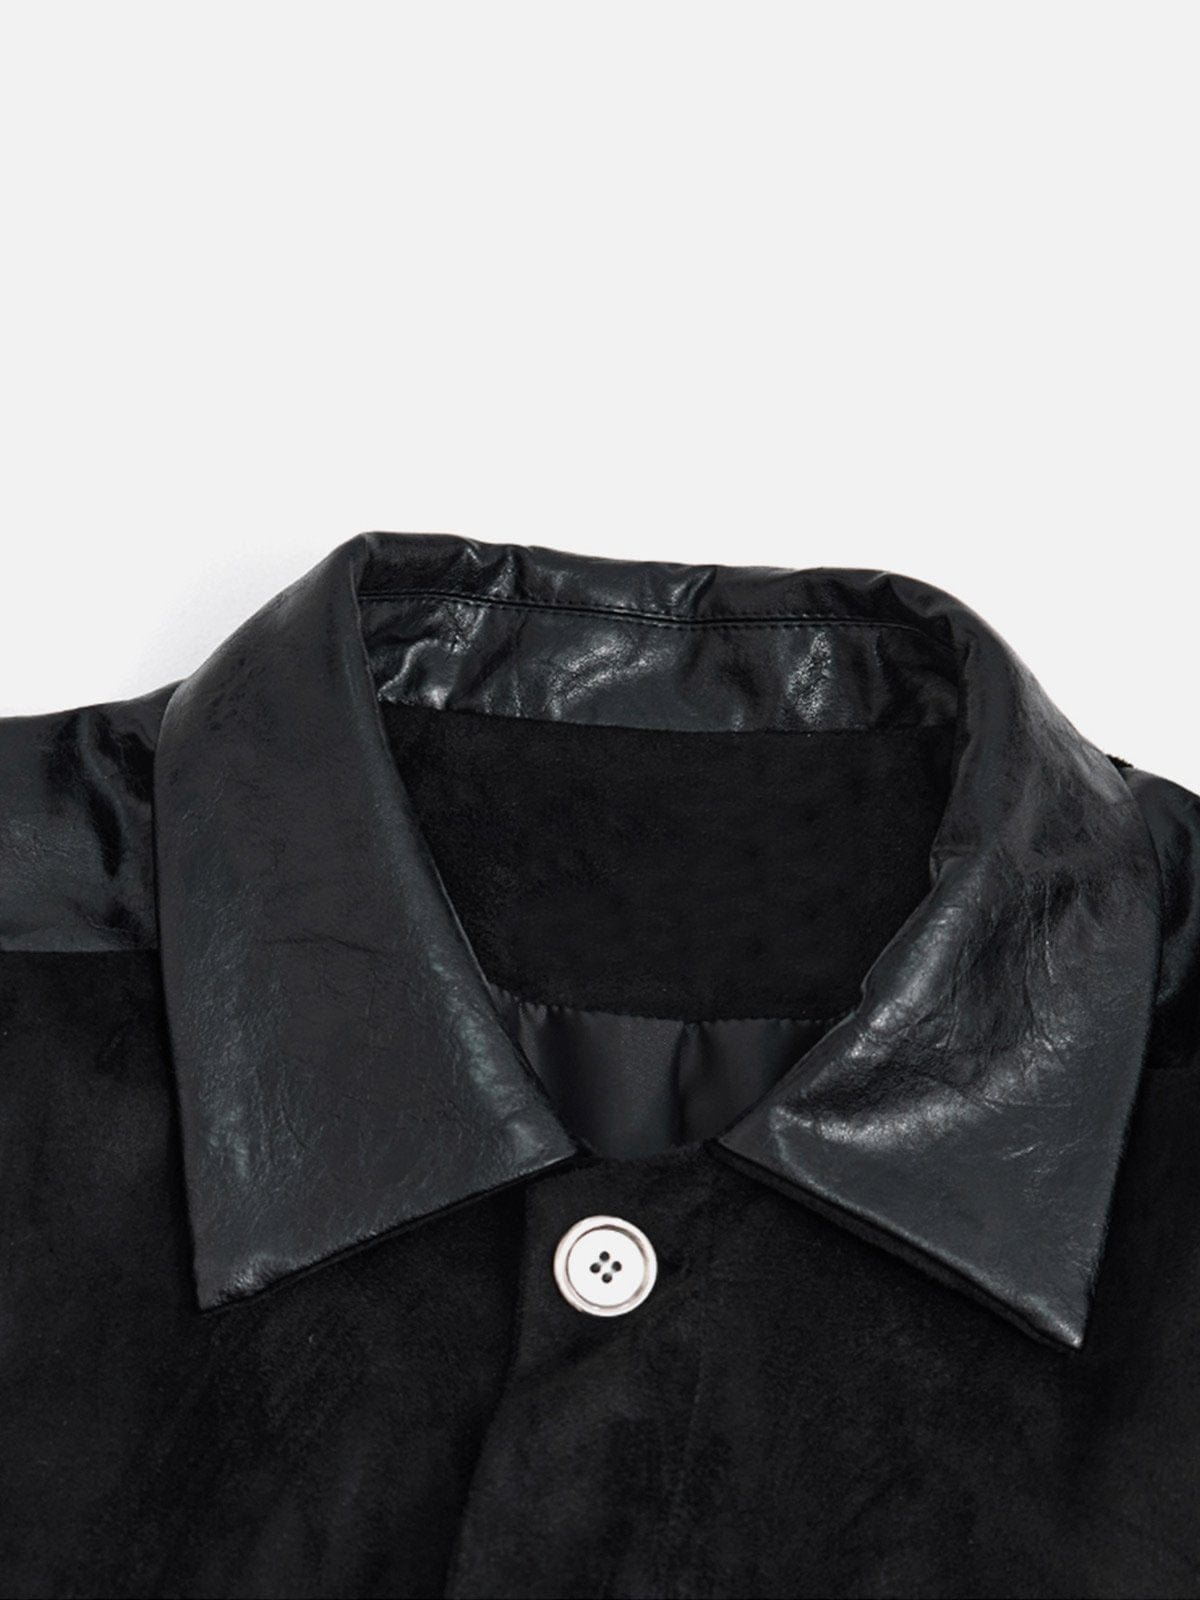 NEV PU Leather Material Splicing Jacket